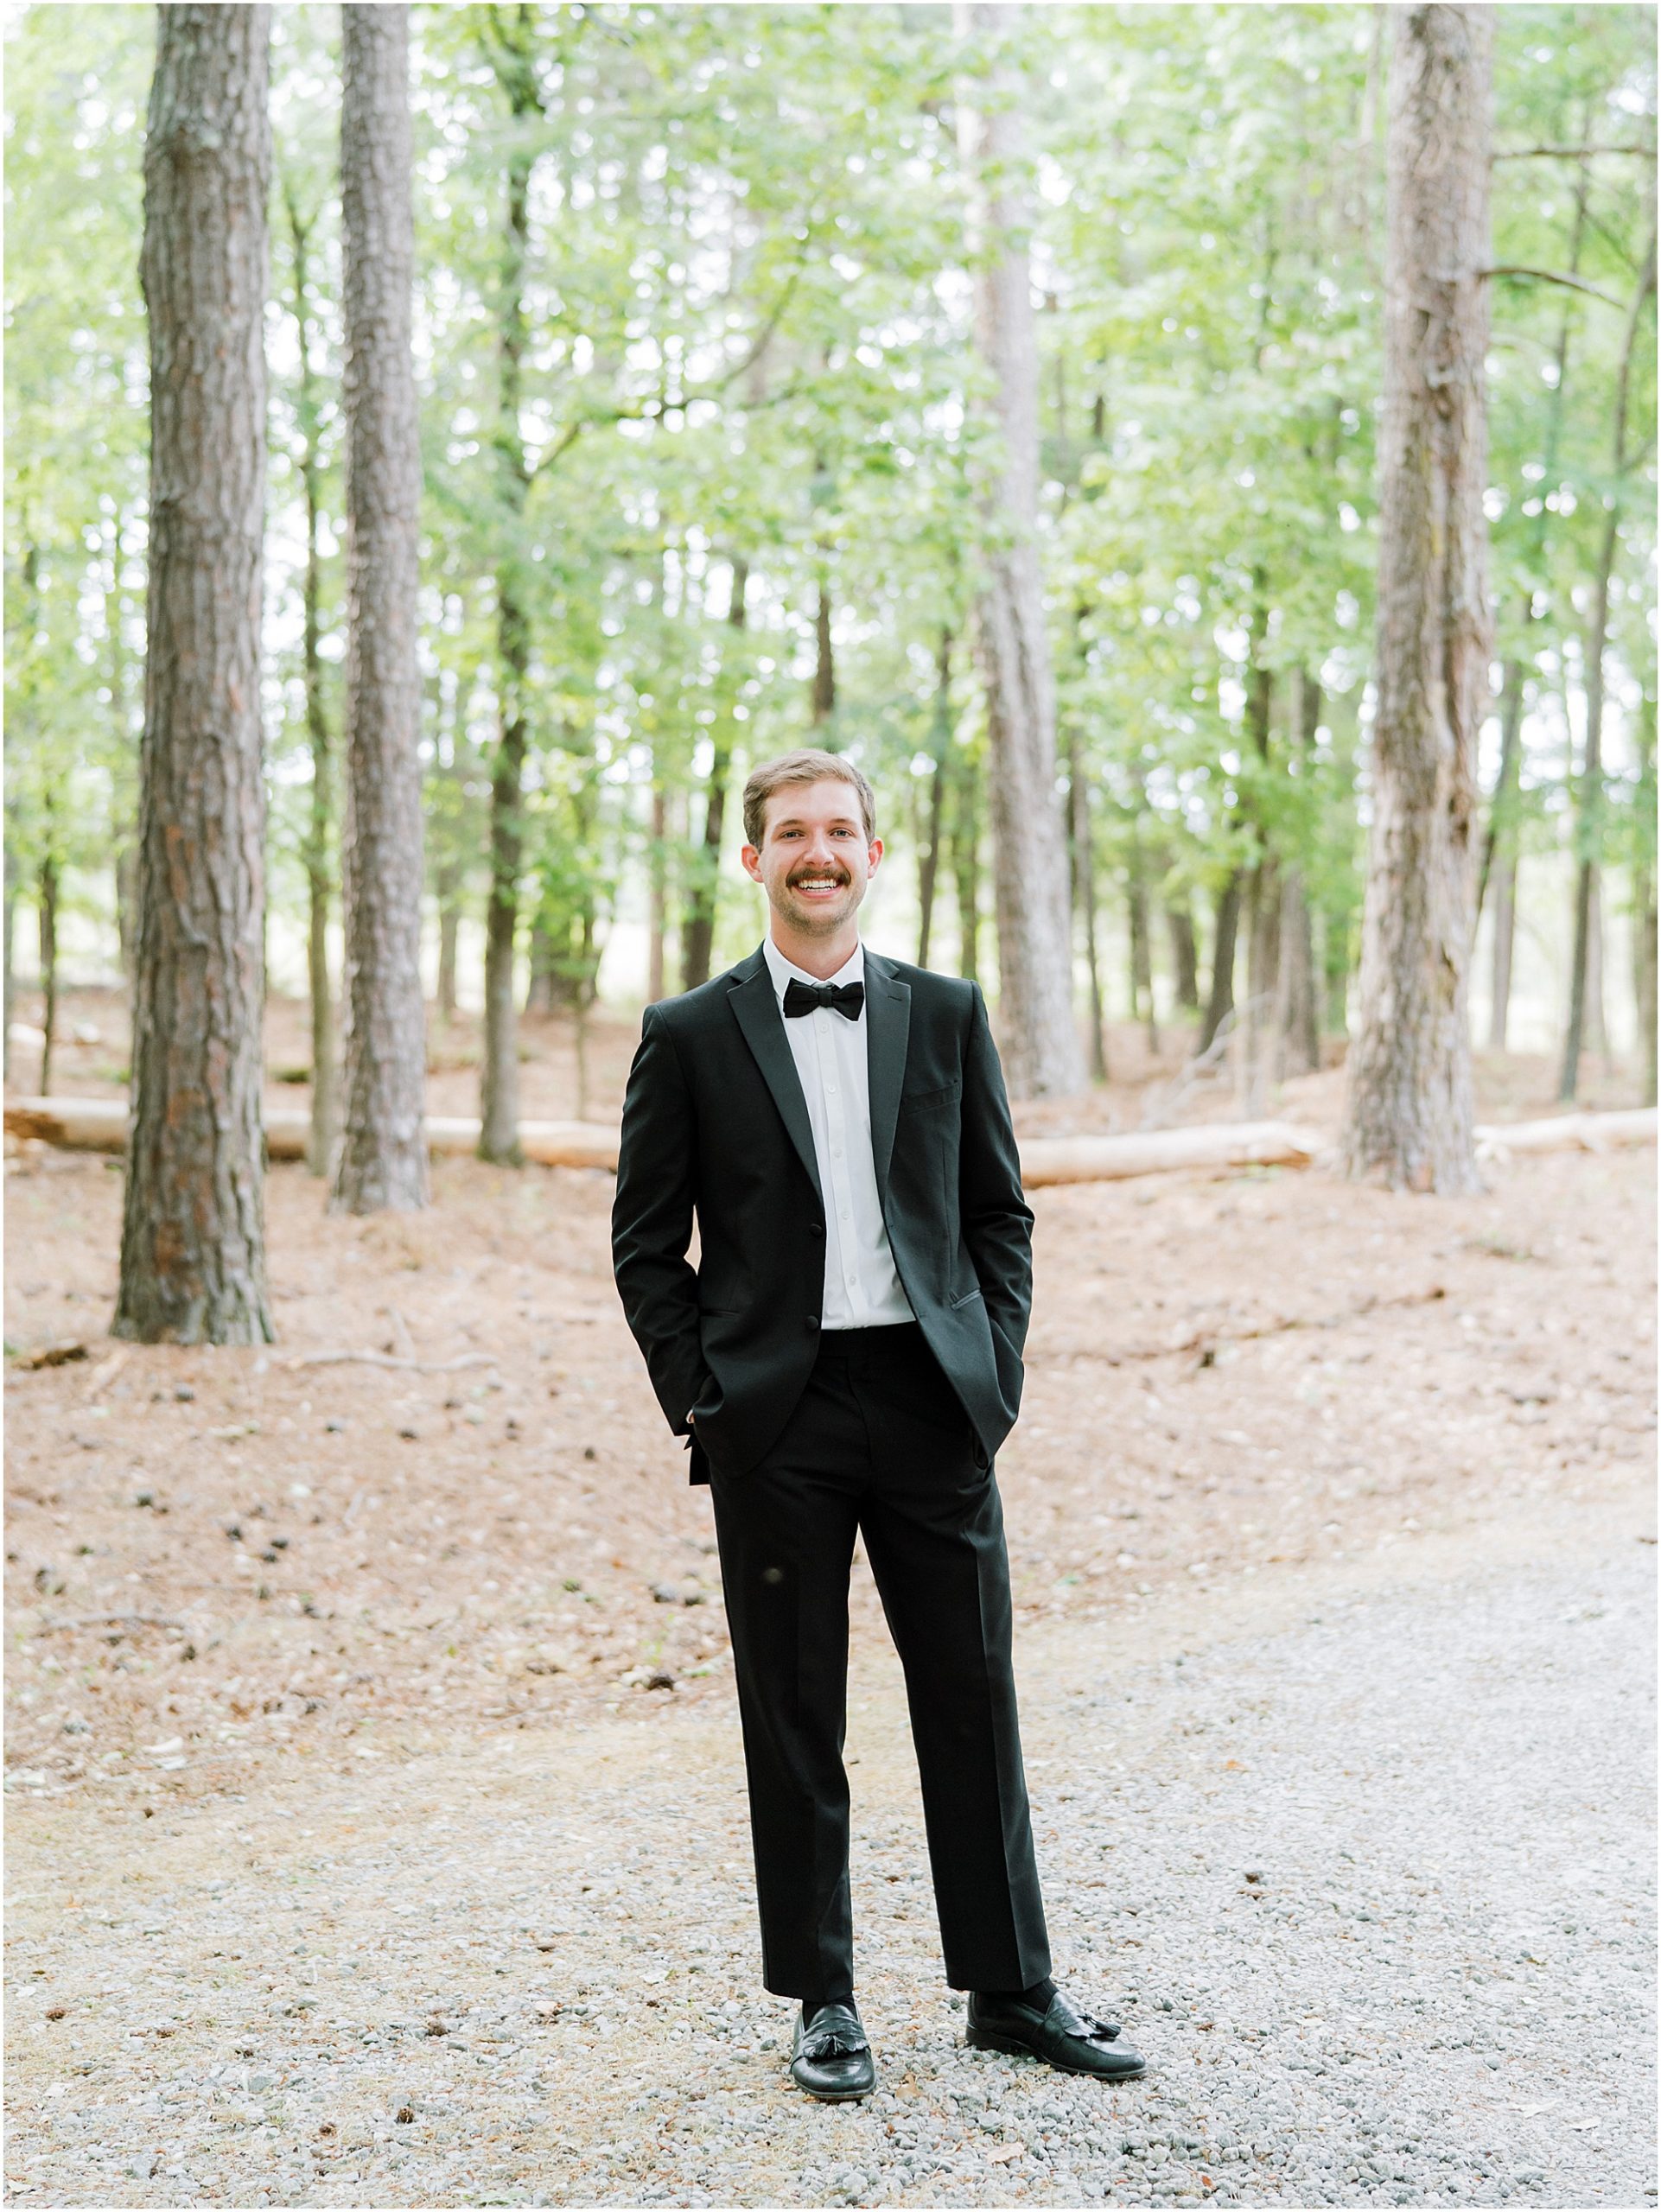 Groom standing for a portrait.